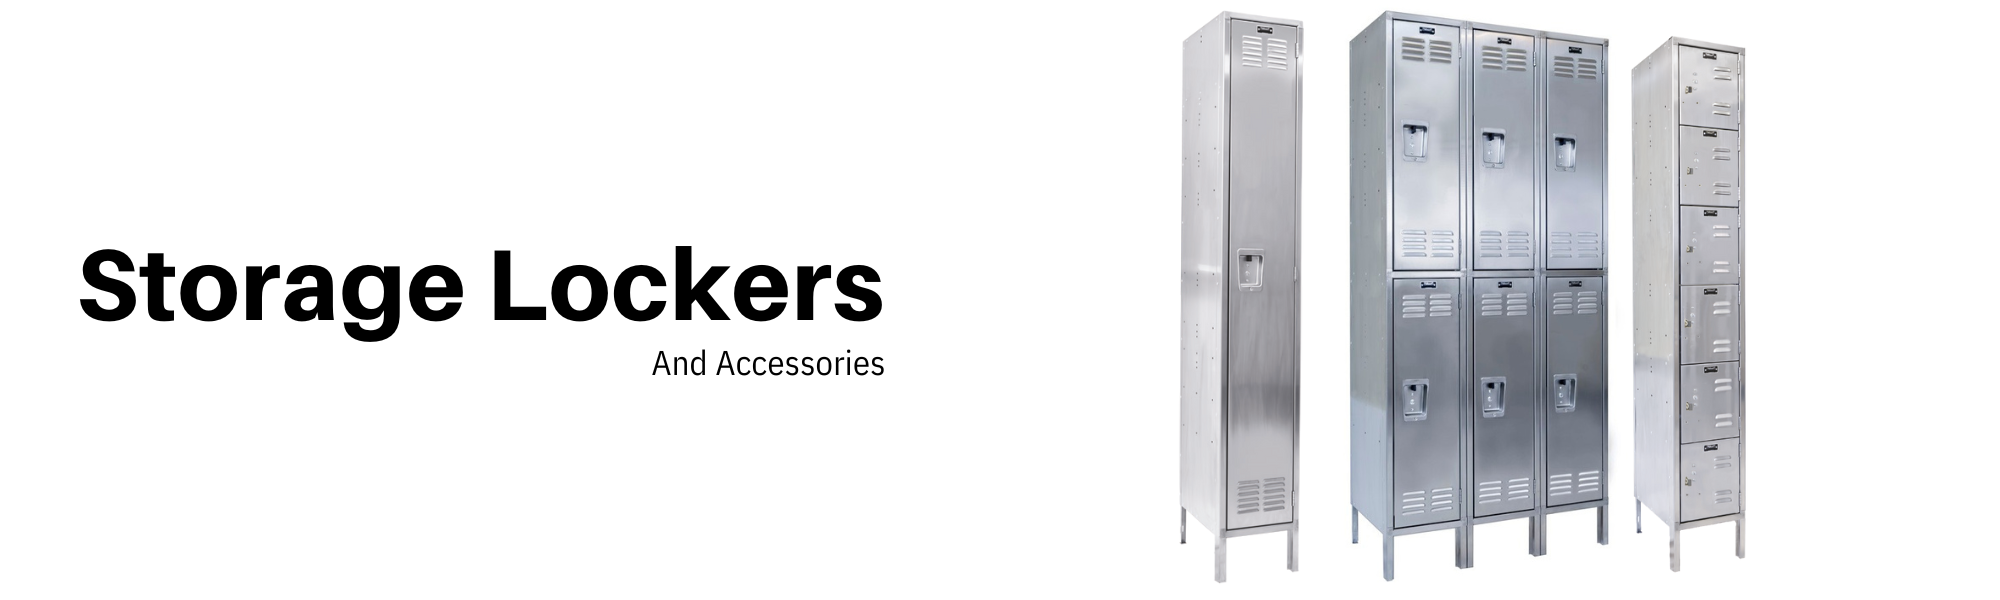 Get the lockers you need from Store Displays! We offer a variety of durable, quality lockers for all uses including locker room storage, ventilated lockers, 1 to 3 tier locks and more.